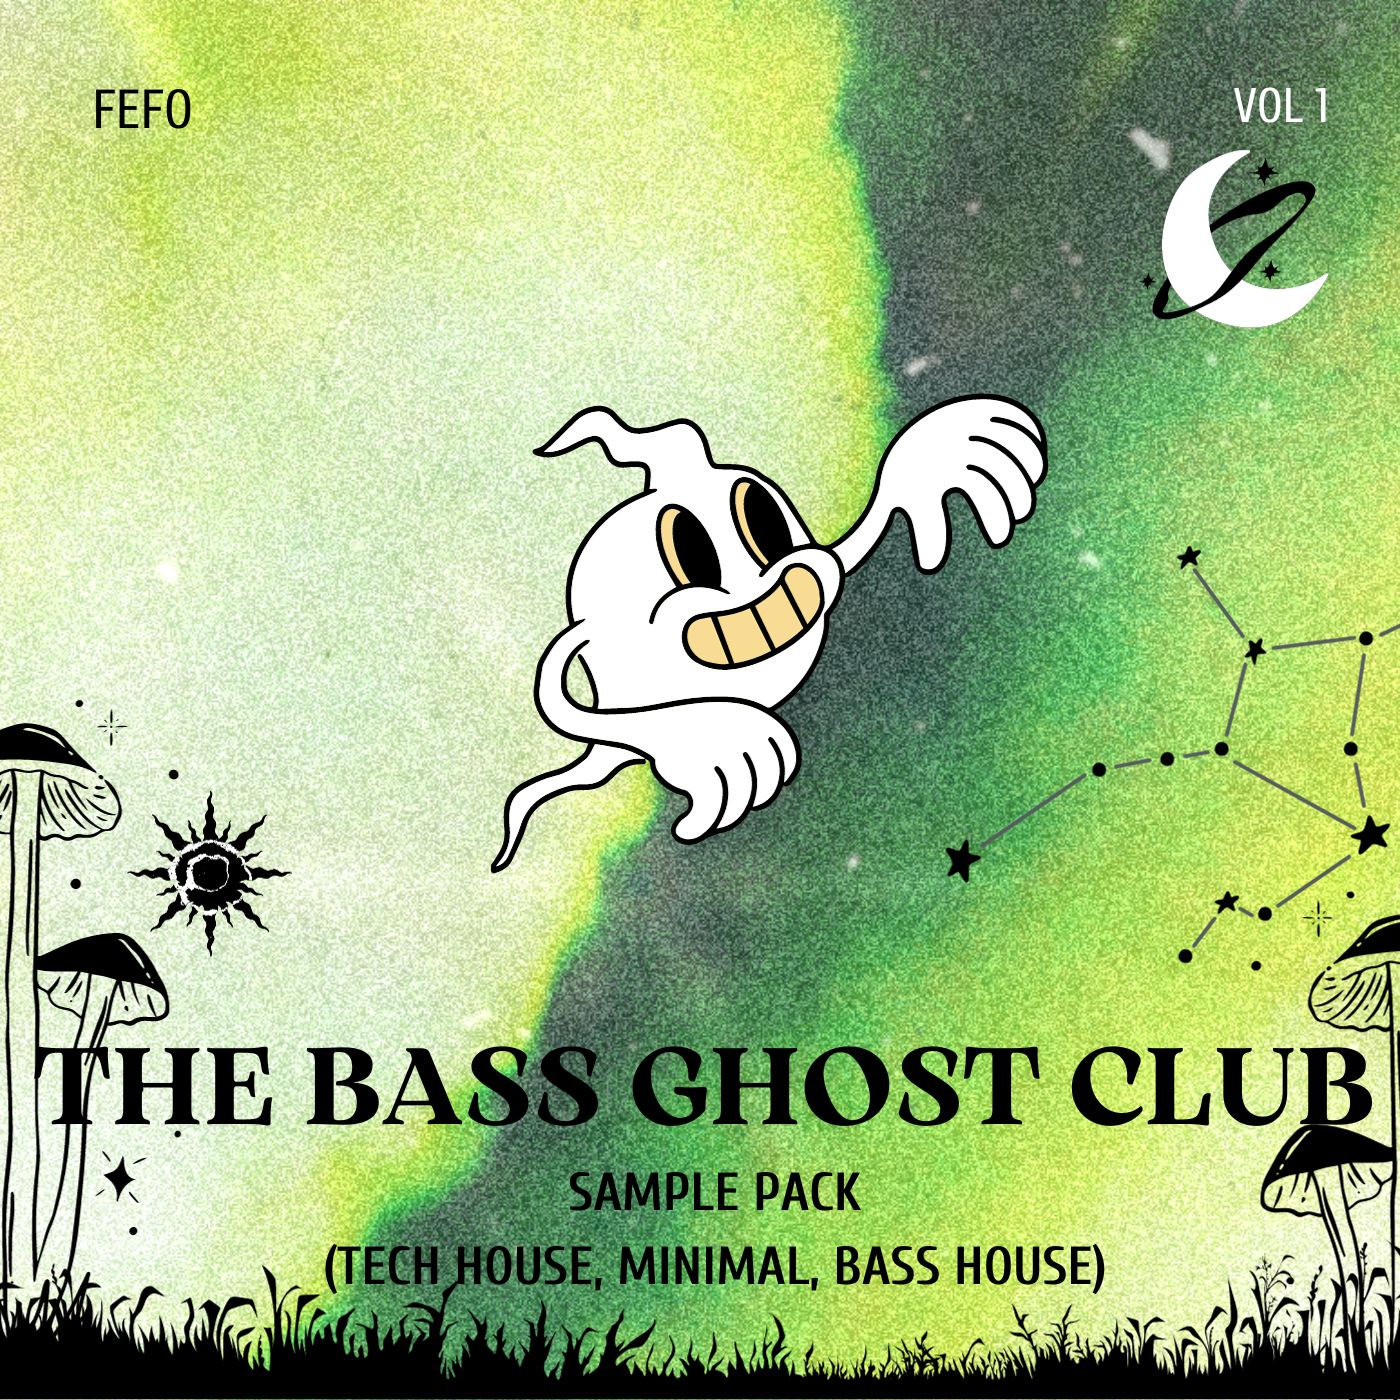 The Bass Ghost House Sample Pack Vol.1 | Tech,Minimal,Bass House - FEFO - Scraps Audio